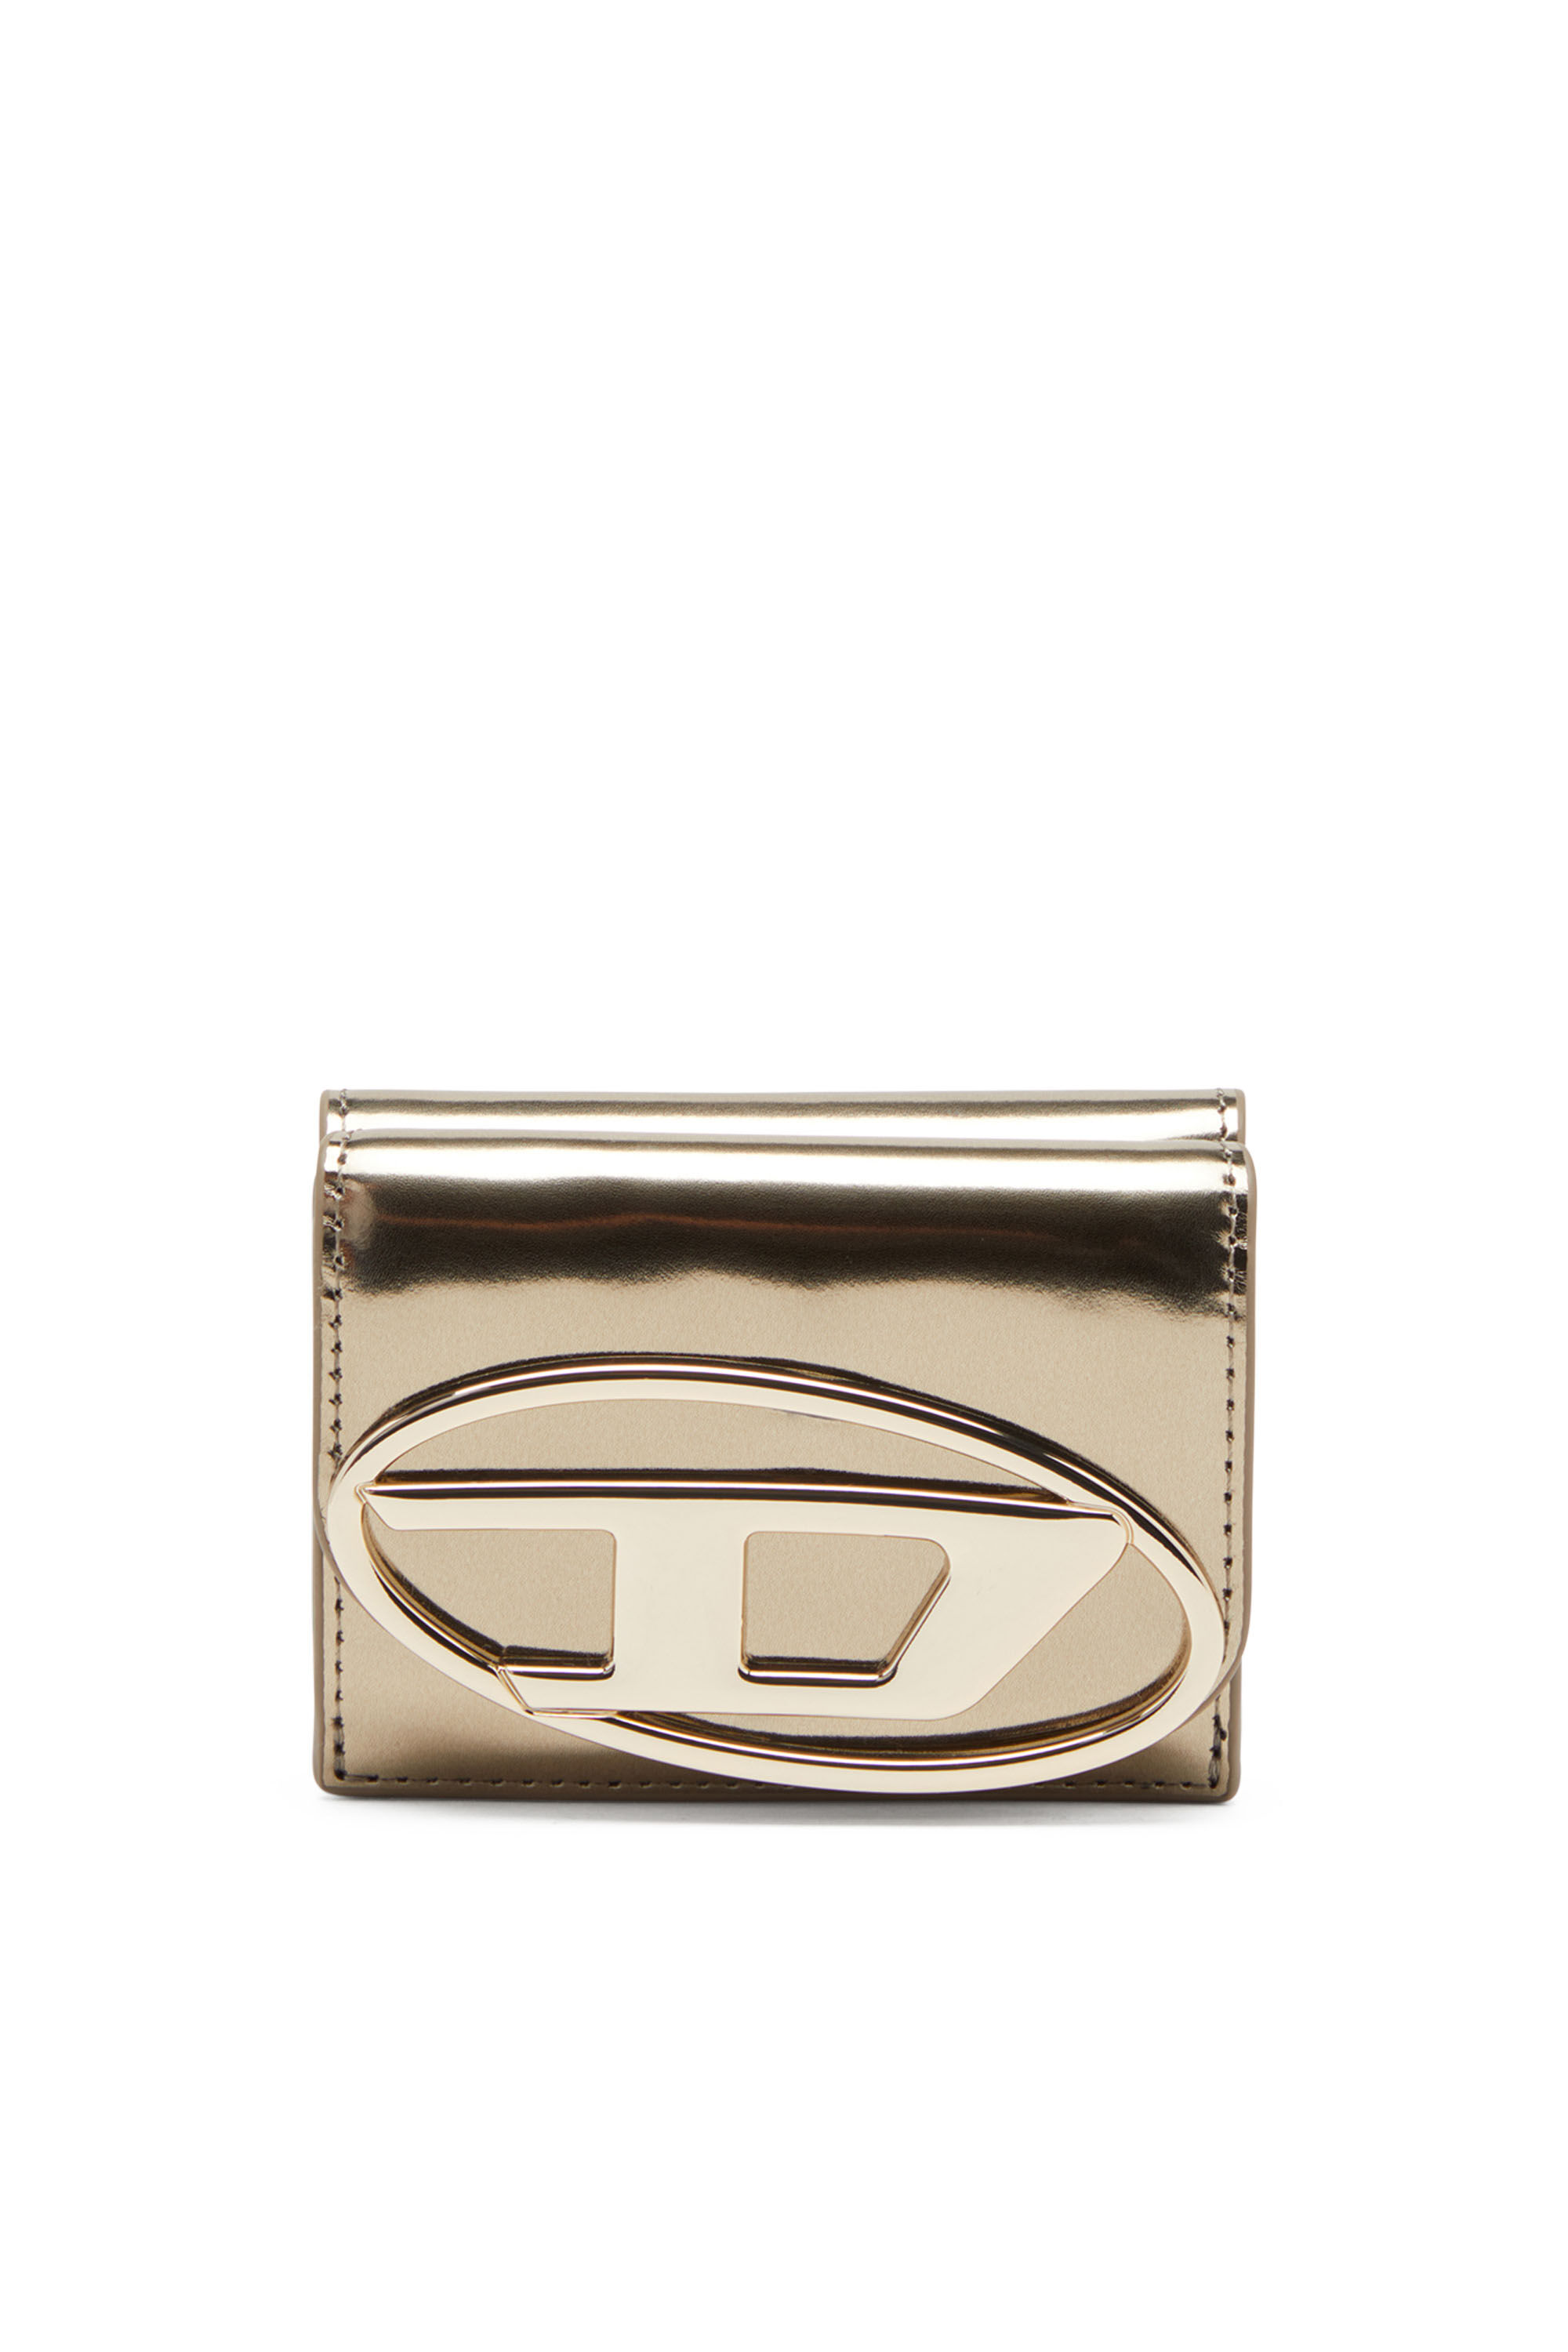 Diesel - 1DR TRI FOLD COIN XS II, Female Tri-fold wallet in mirrored leather in ブラウン - Image 1